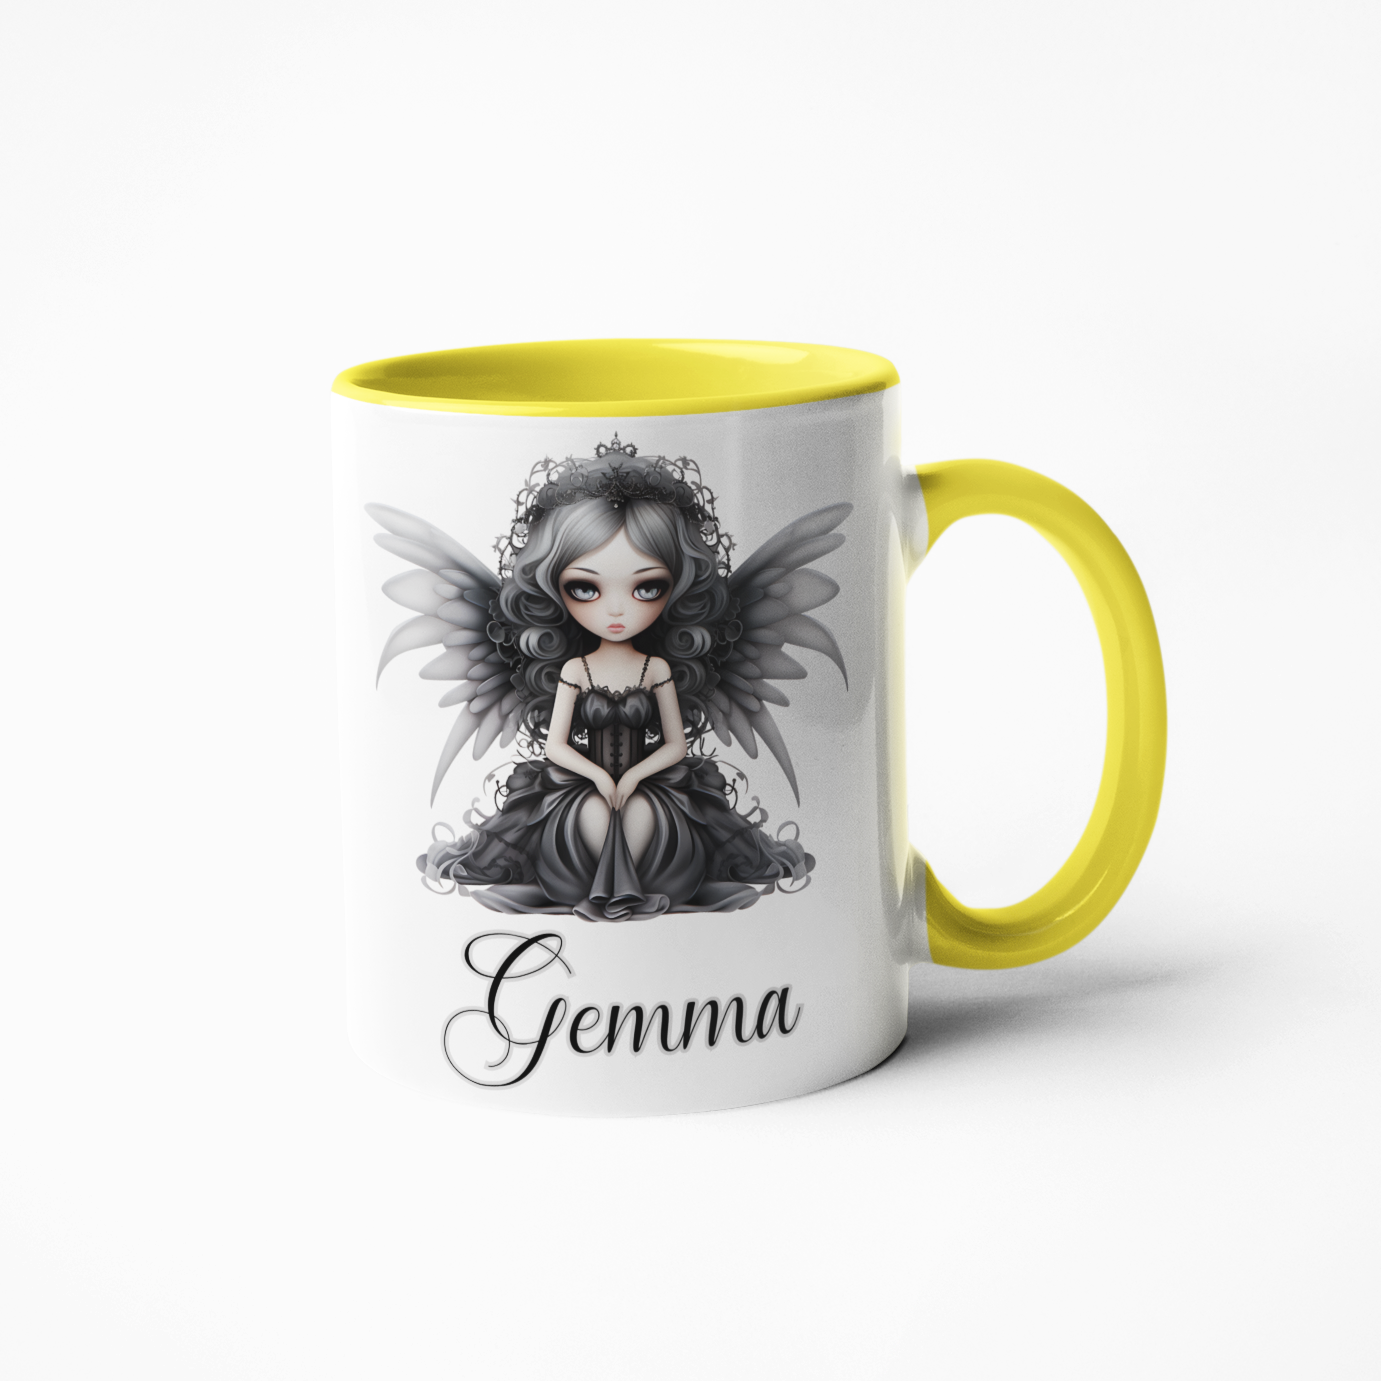 Gothic doll with wings coffee mug